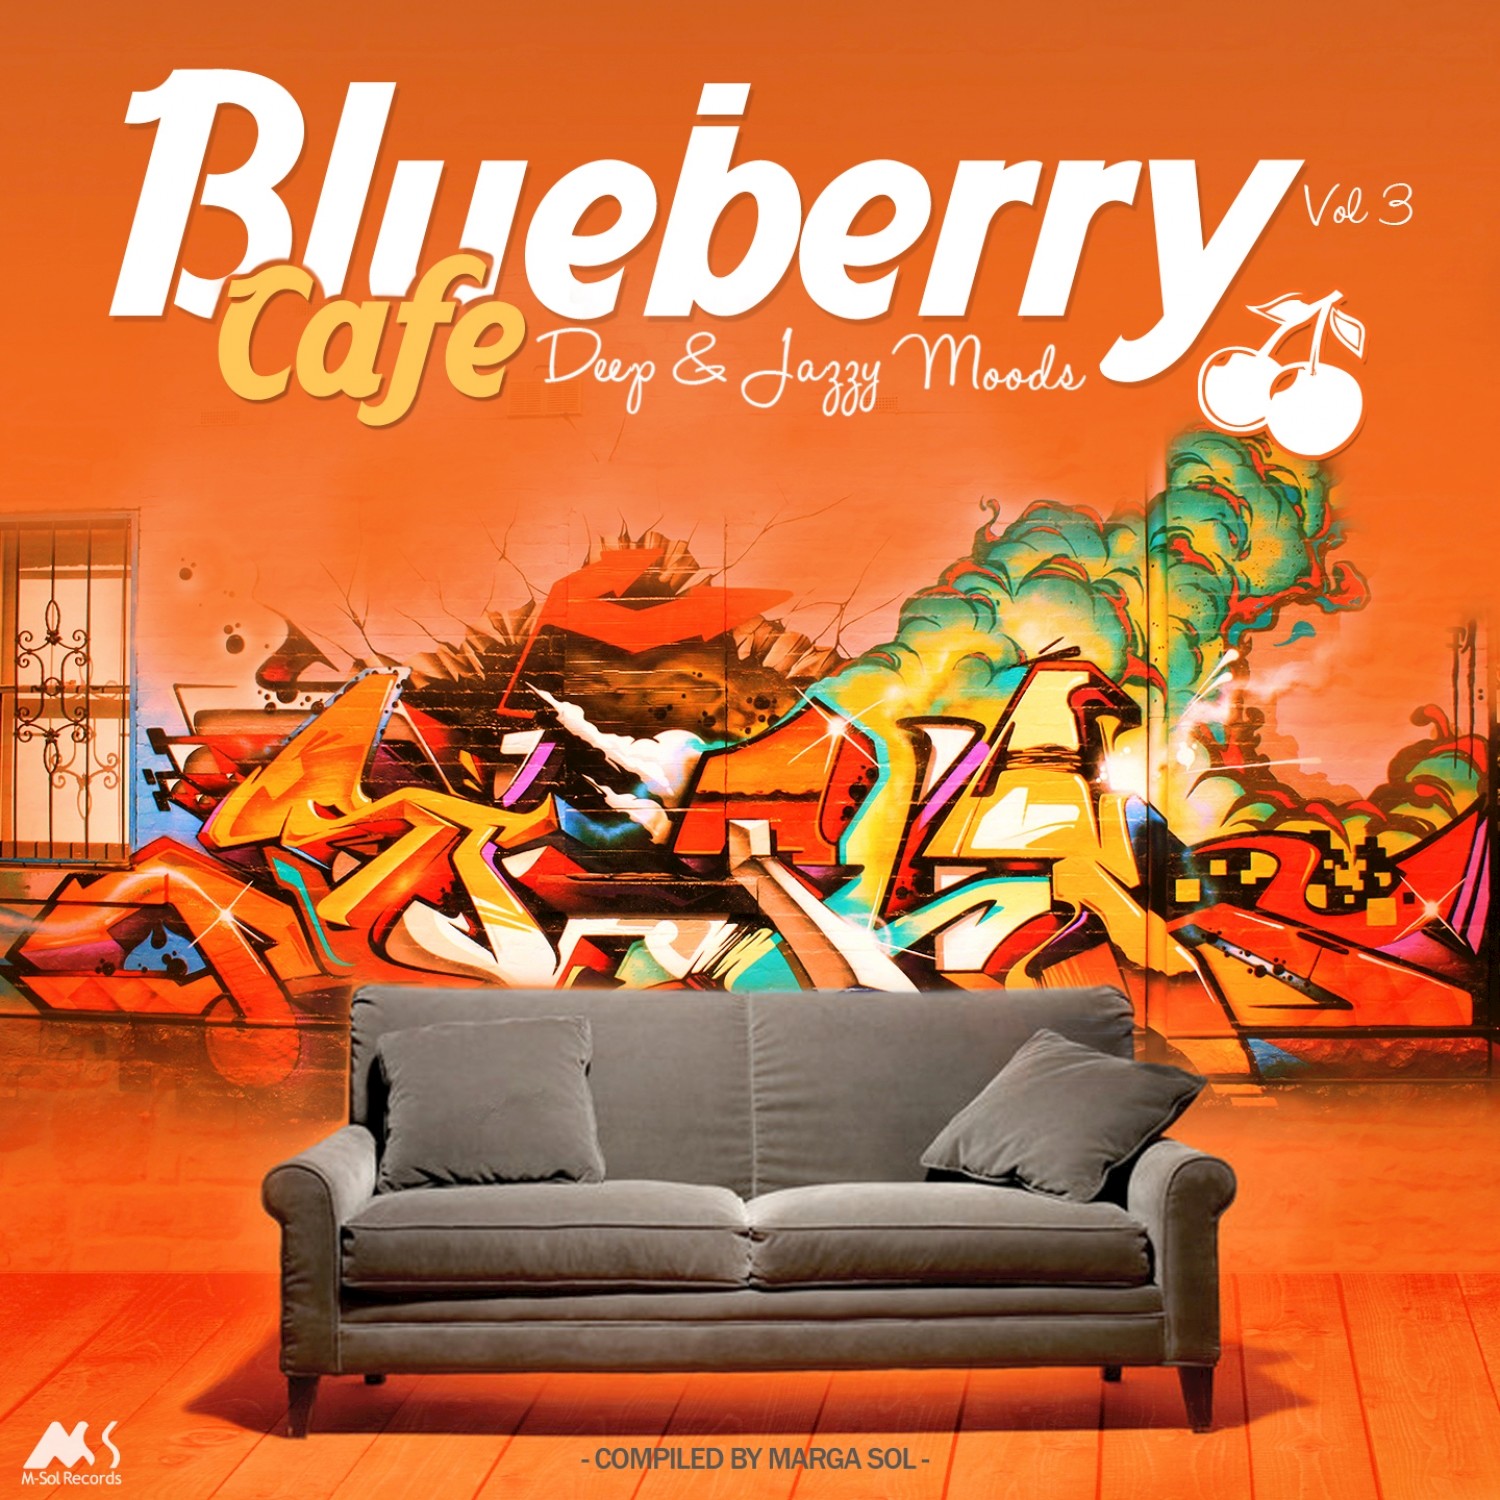 Blueberry Cafe, Vol. 3 Blueberry Cafe, Vol. 3 Deep  Jazzy Moods Compiled by Marga Sol